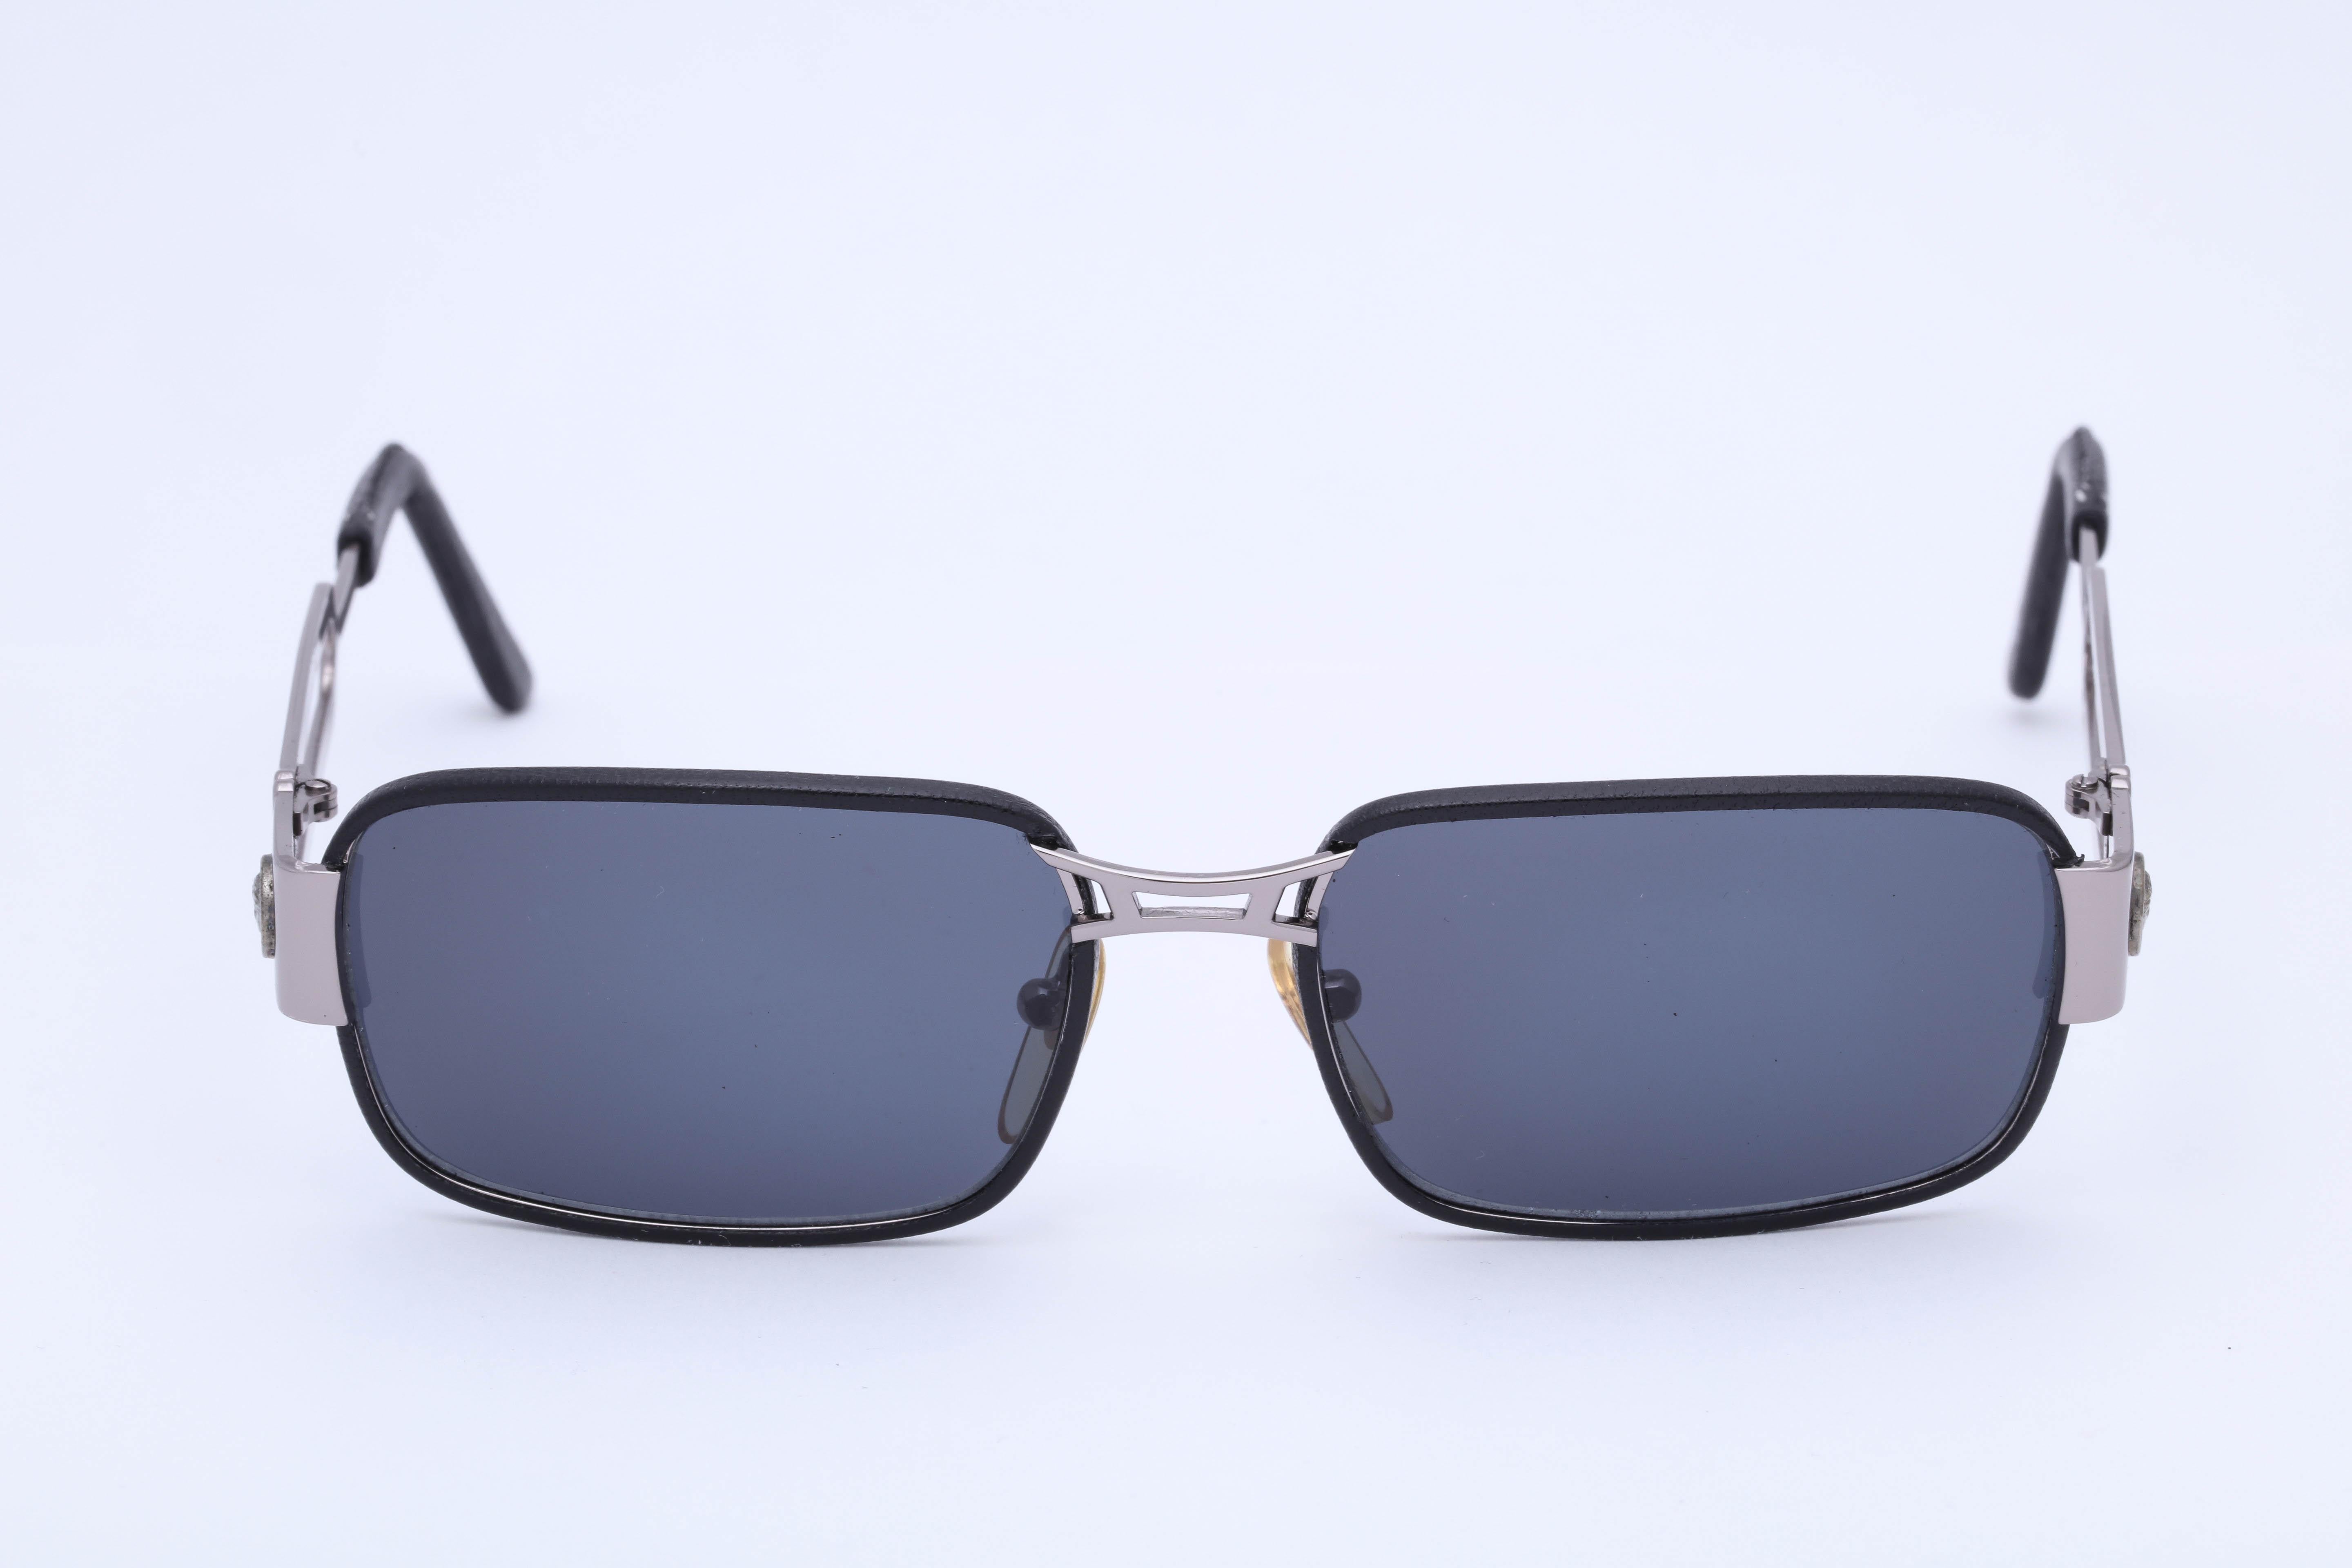 Gianni Versace Vintage Sunglasses Mod S55/P In Excellent Condition For Sale In Chicago, IL